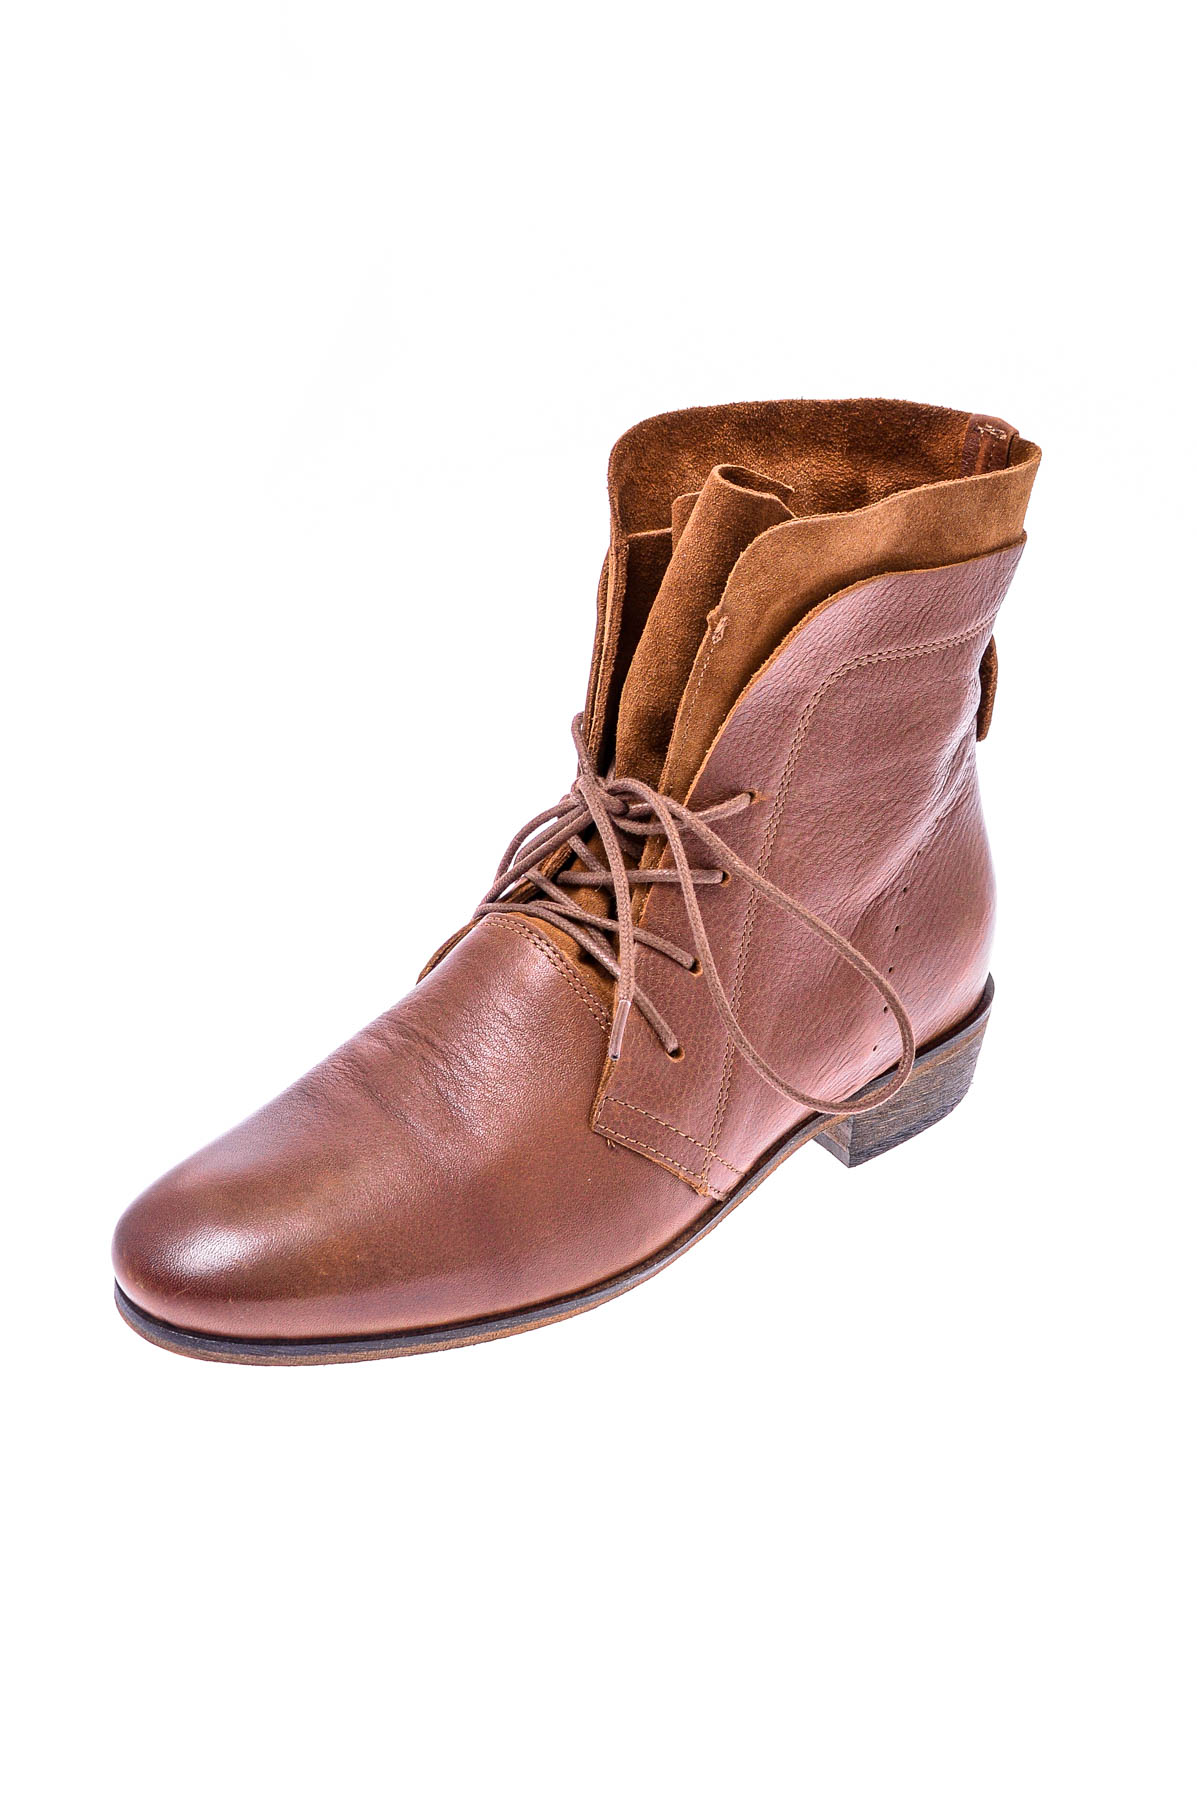 Women's boots - Haghe by HUB - 1